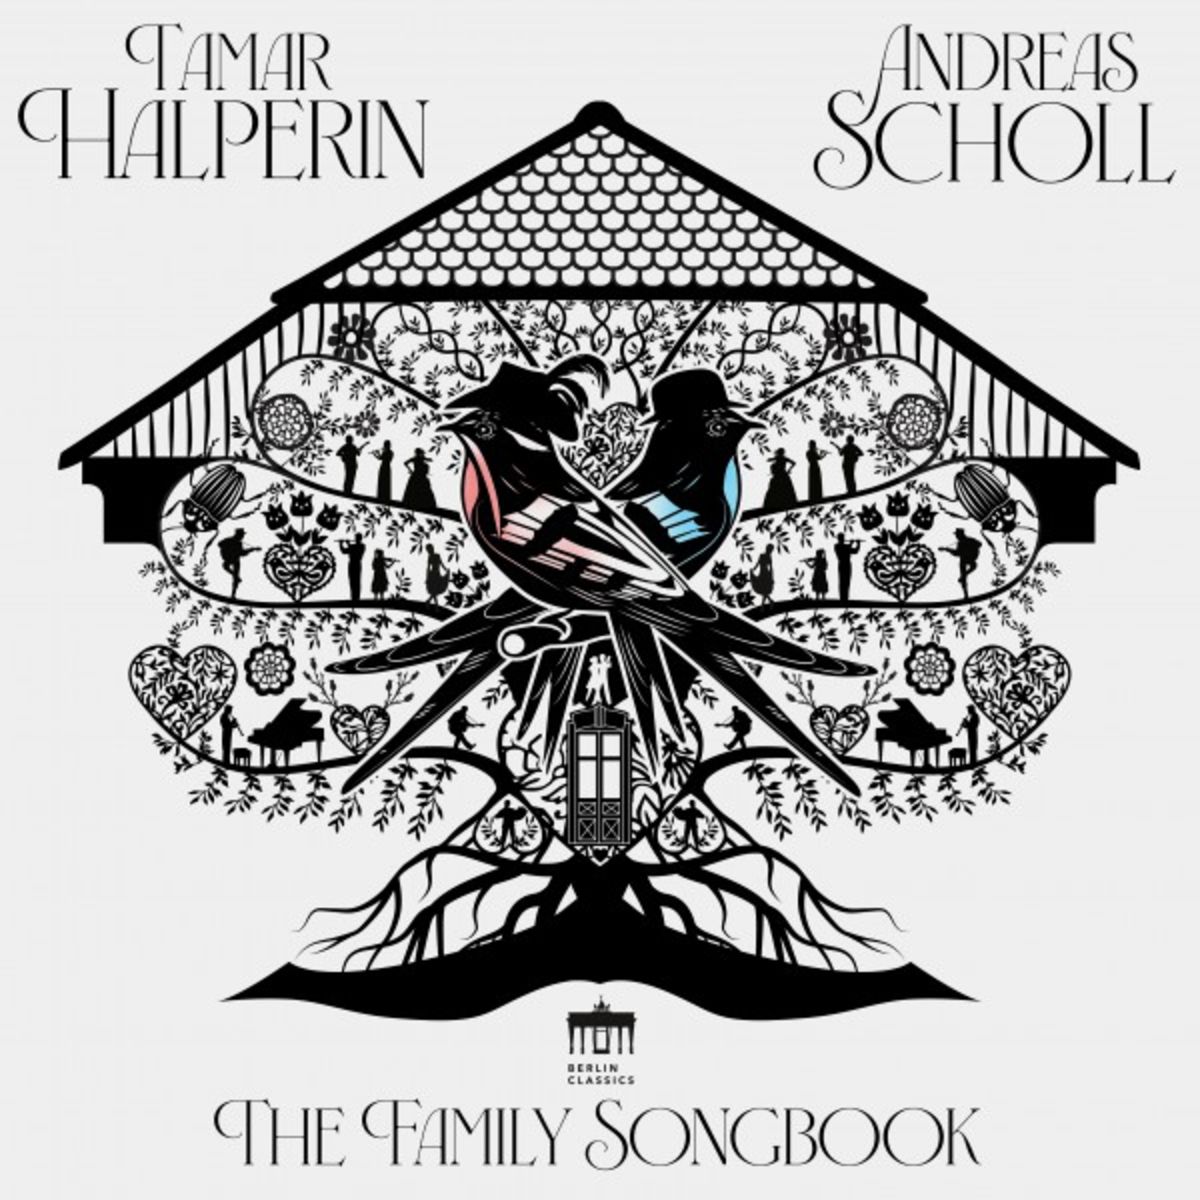 Andreas Scholl & Tamar Halperin - The Family Songbook (Deluxe Version) (2018) [FLAC 24bit/44,1kHz]